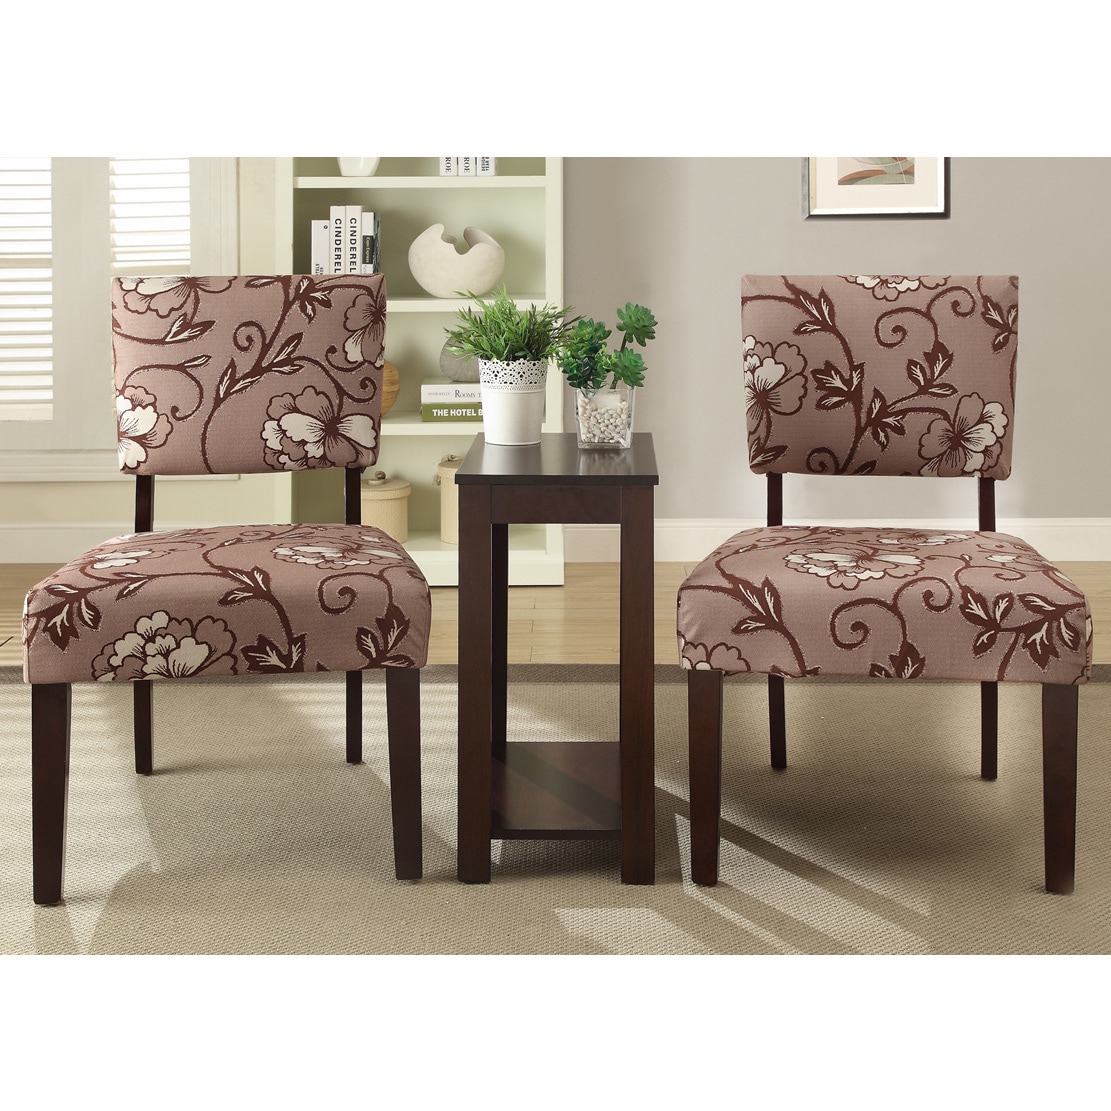 alexis vine piece printed accent chair and side table set free shipping today ikea nightstand lap desk target round linen tablecloth oval acrylic coffee unique furniture small